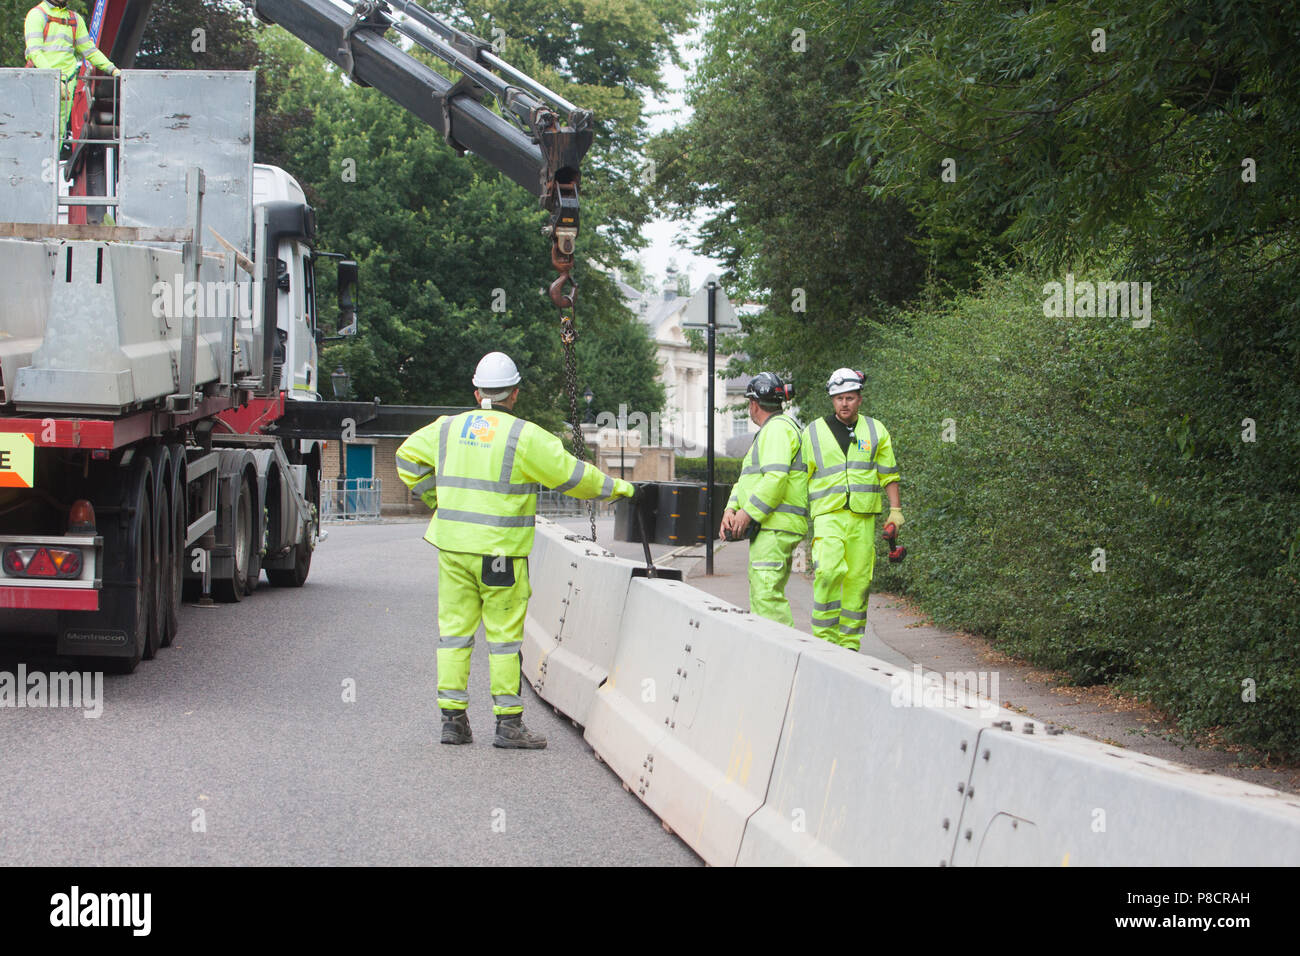 London UK. 11th July 2018. Security metal barriers and fences are installed around the US Ambassador's residence at  Winfield House in Regents Park to create a ring of steel where President Donald Trump will be guest during his first official visit to the United Kingdom on 13 July.  US President Donald Trump will meet British Prime Minister Theresa May and Queen Elizabeth II after a postponed trip to Britain starting  during which he will also discuss the prospects for a UK-US free trade deal after Brexit. Credit: amer ghazzal/Alamy Live News Stock Photo